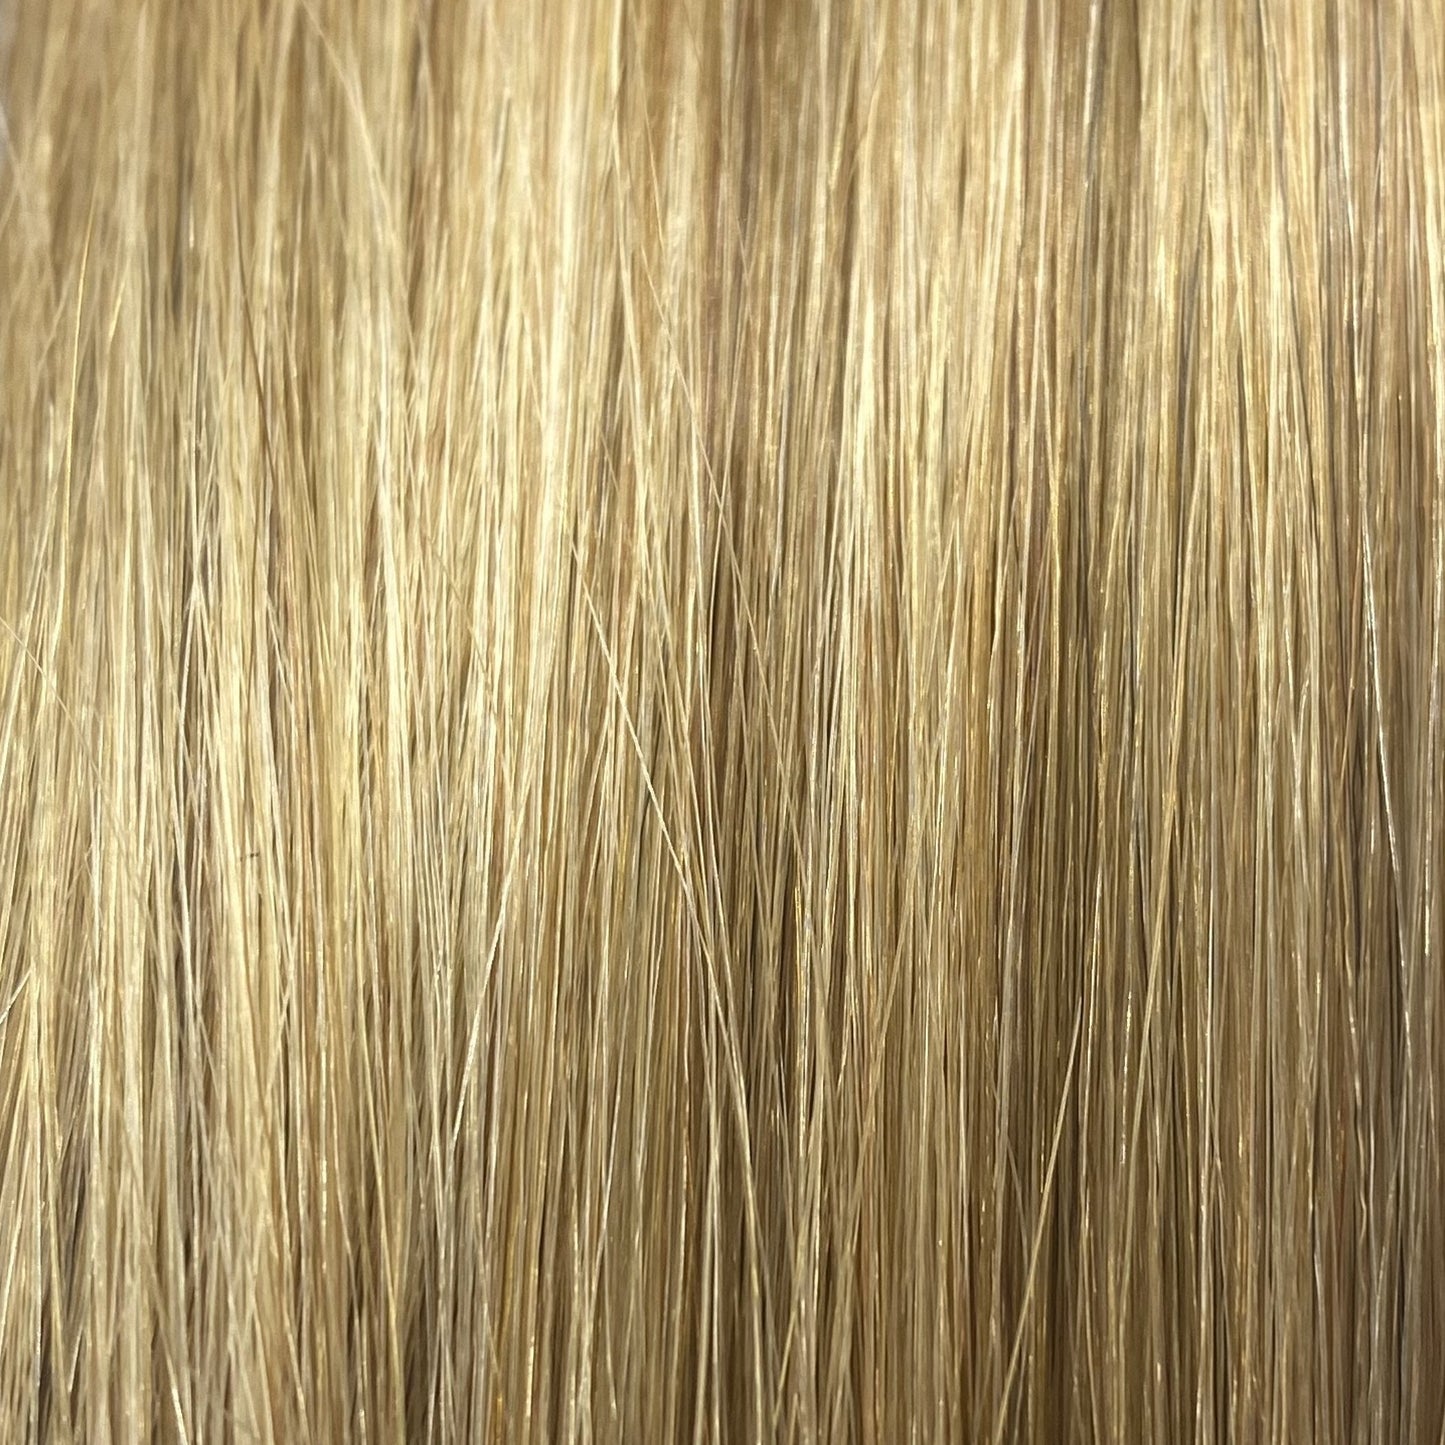 Fusion hair extensions #12/DB2 - 60cm/24 inches - Copper Golden Blonde/Light Golden Blonde Highlight Fusion Euro So Cap 